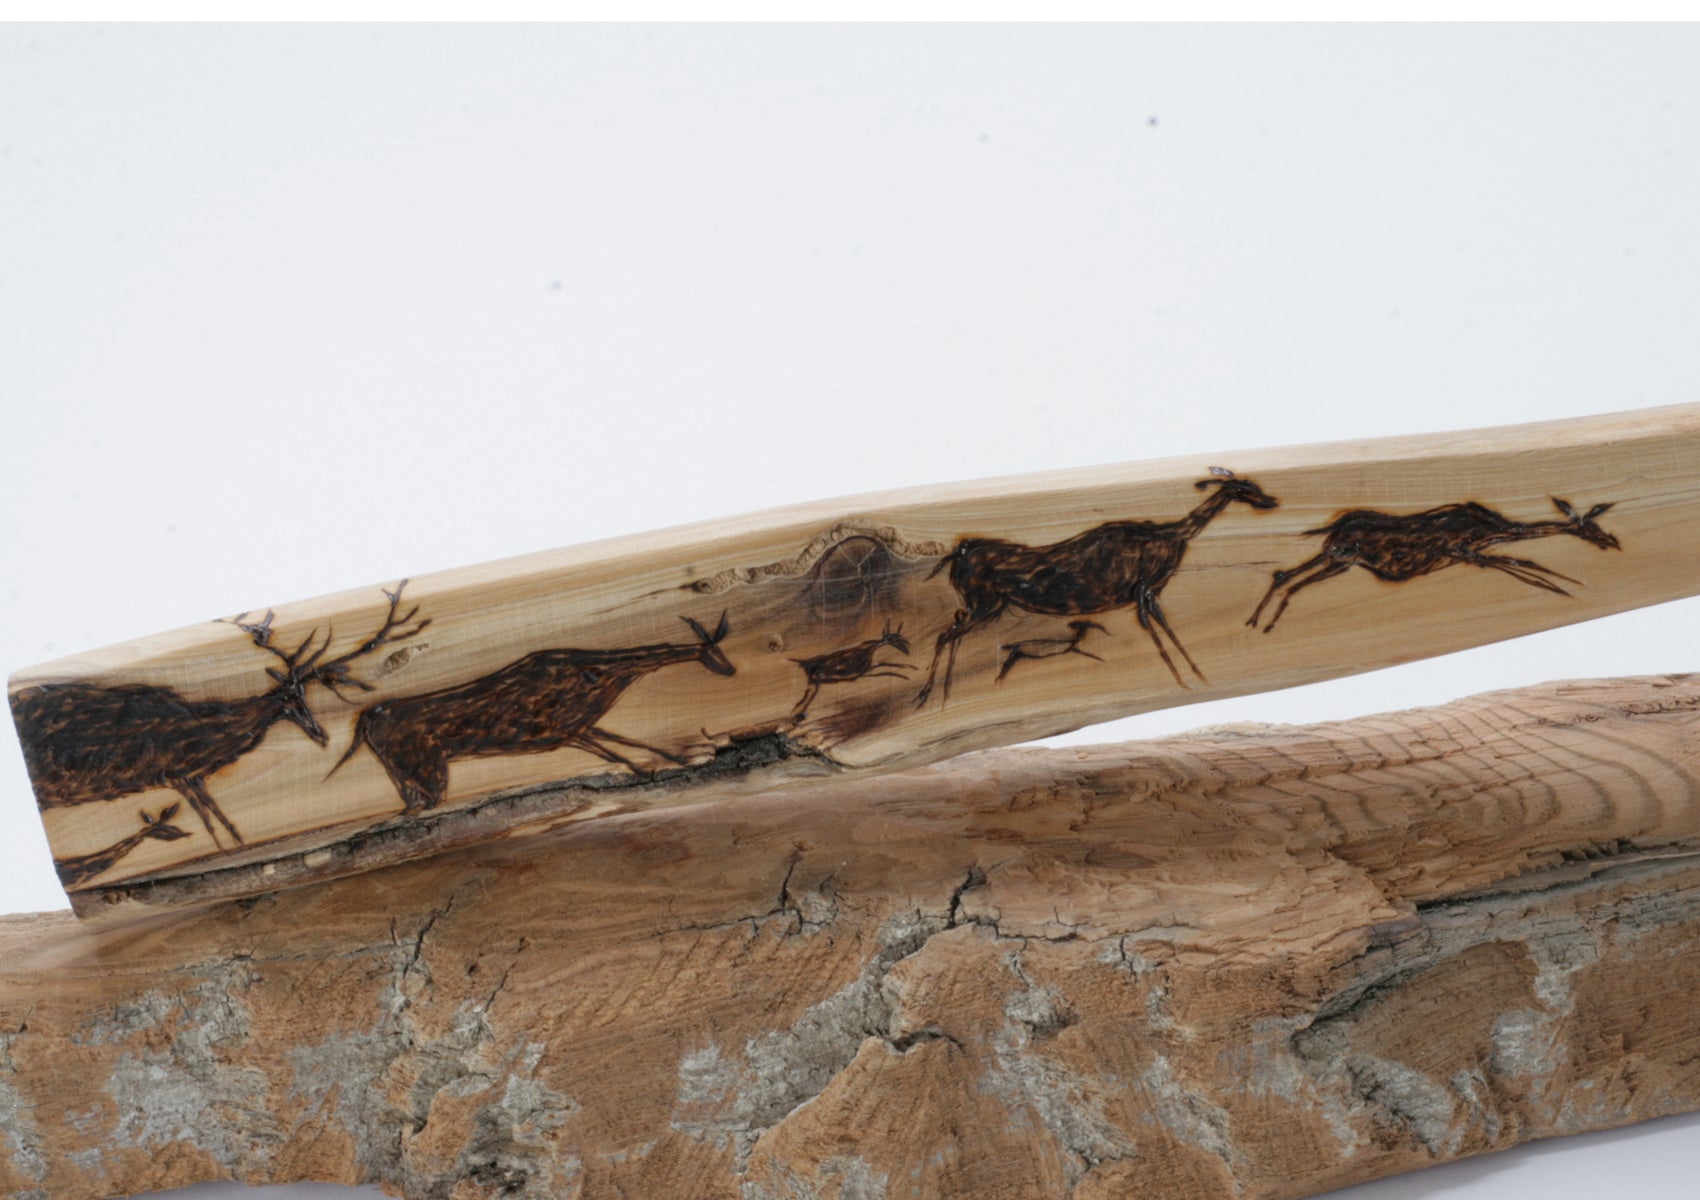 Translucent Obsidian Knife with Woodburned on Drift Wood